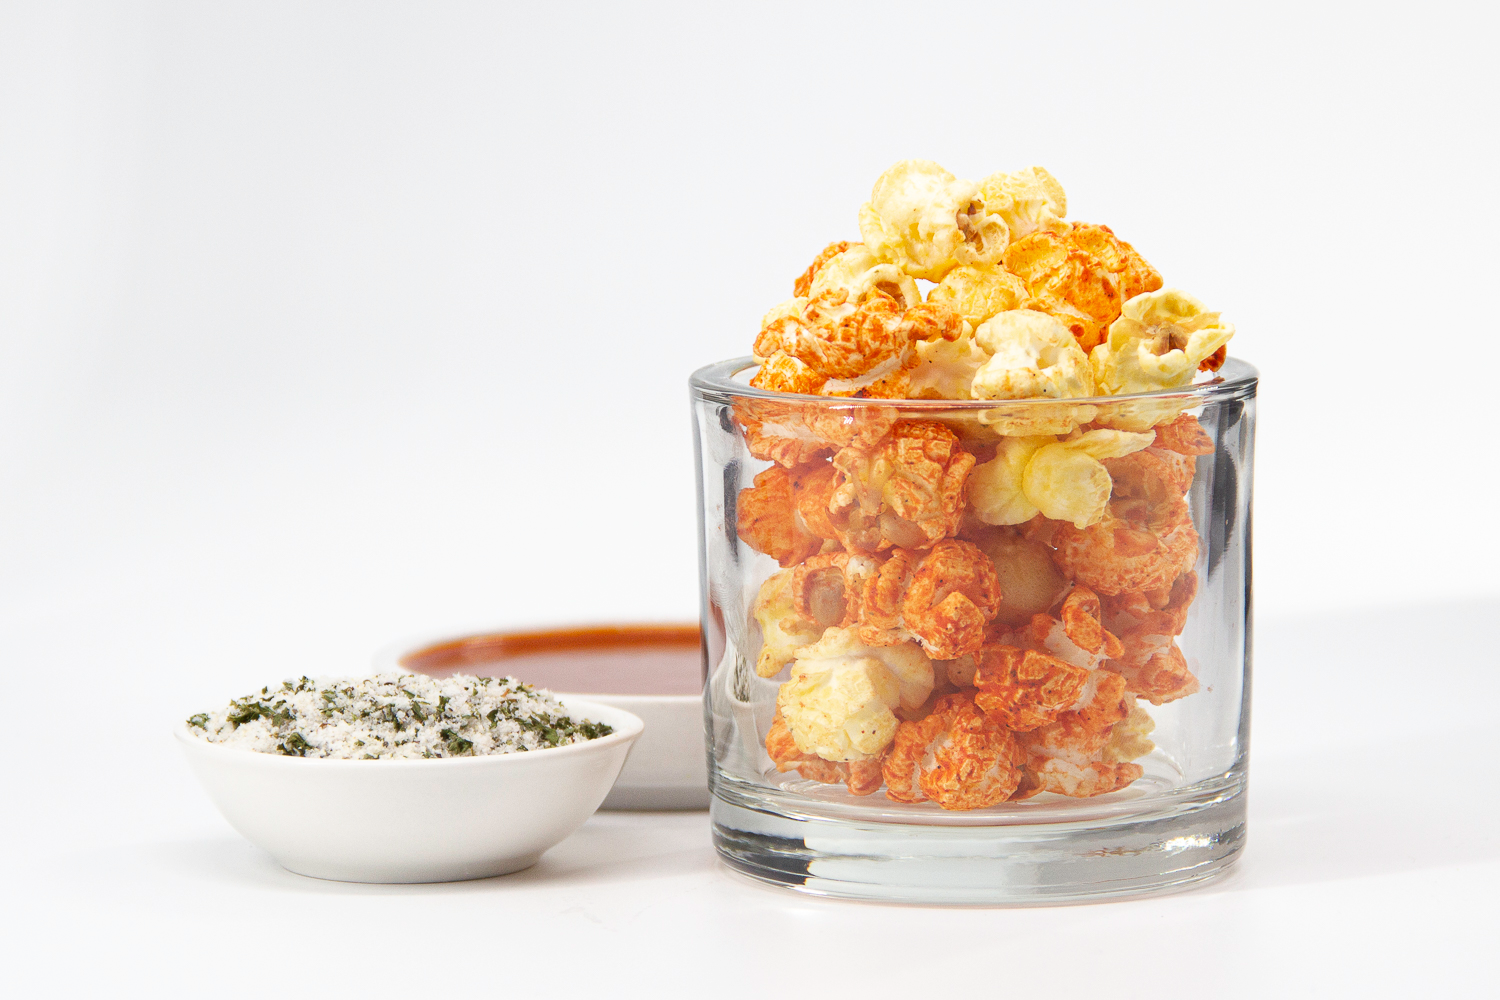 Buffalo Ranch Gourmet Popcorn displayed in clear cup